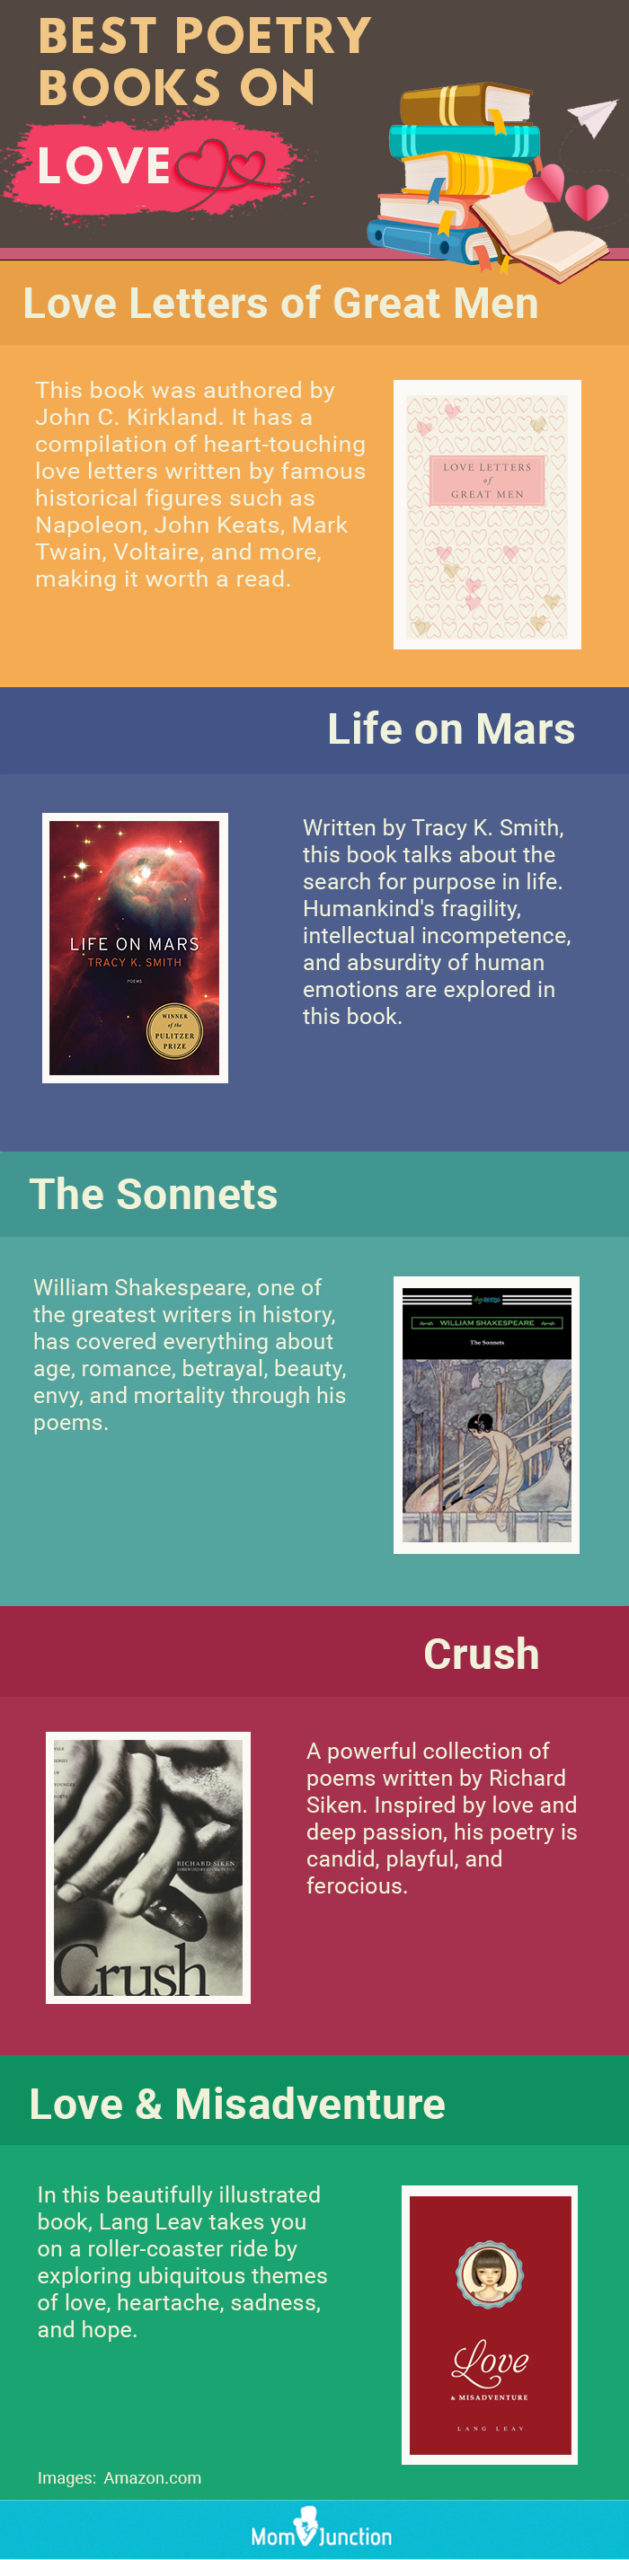 best poetry books on love [infographic]